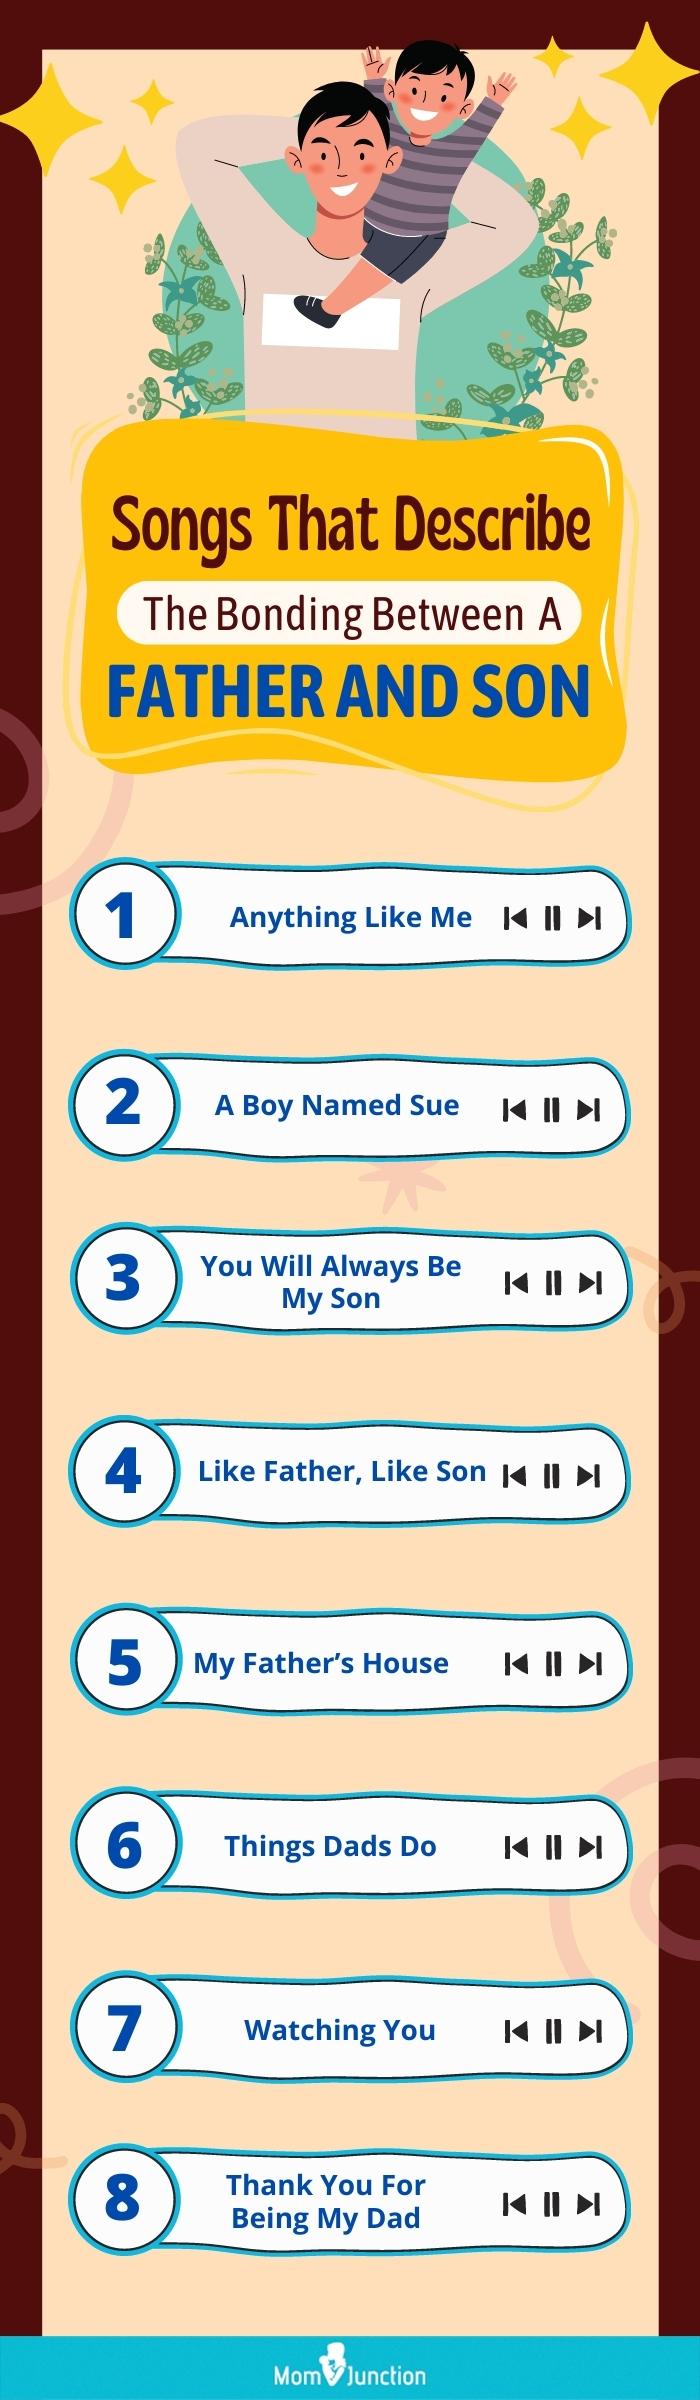 songs about fathers and sons [infographic]